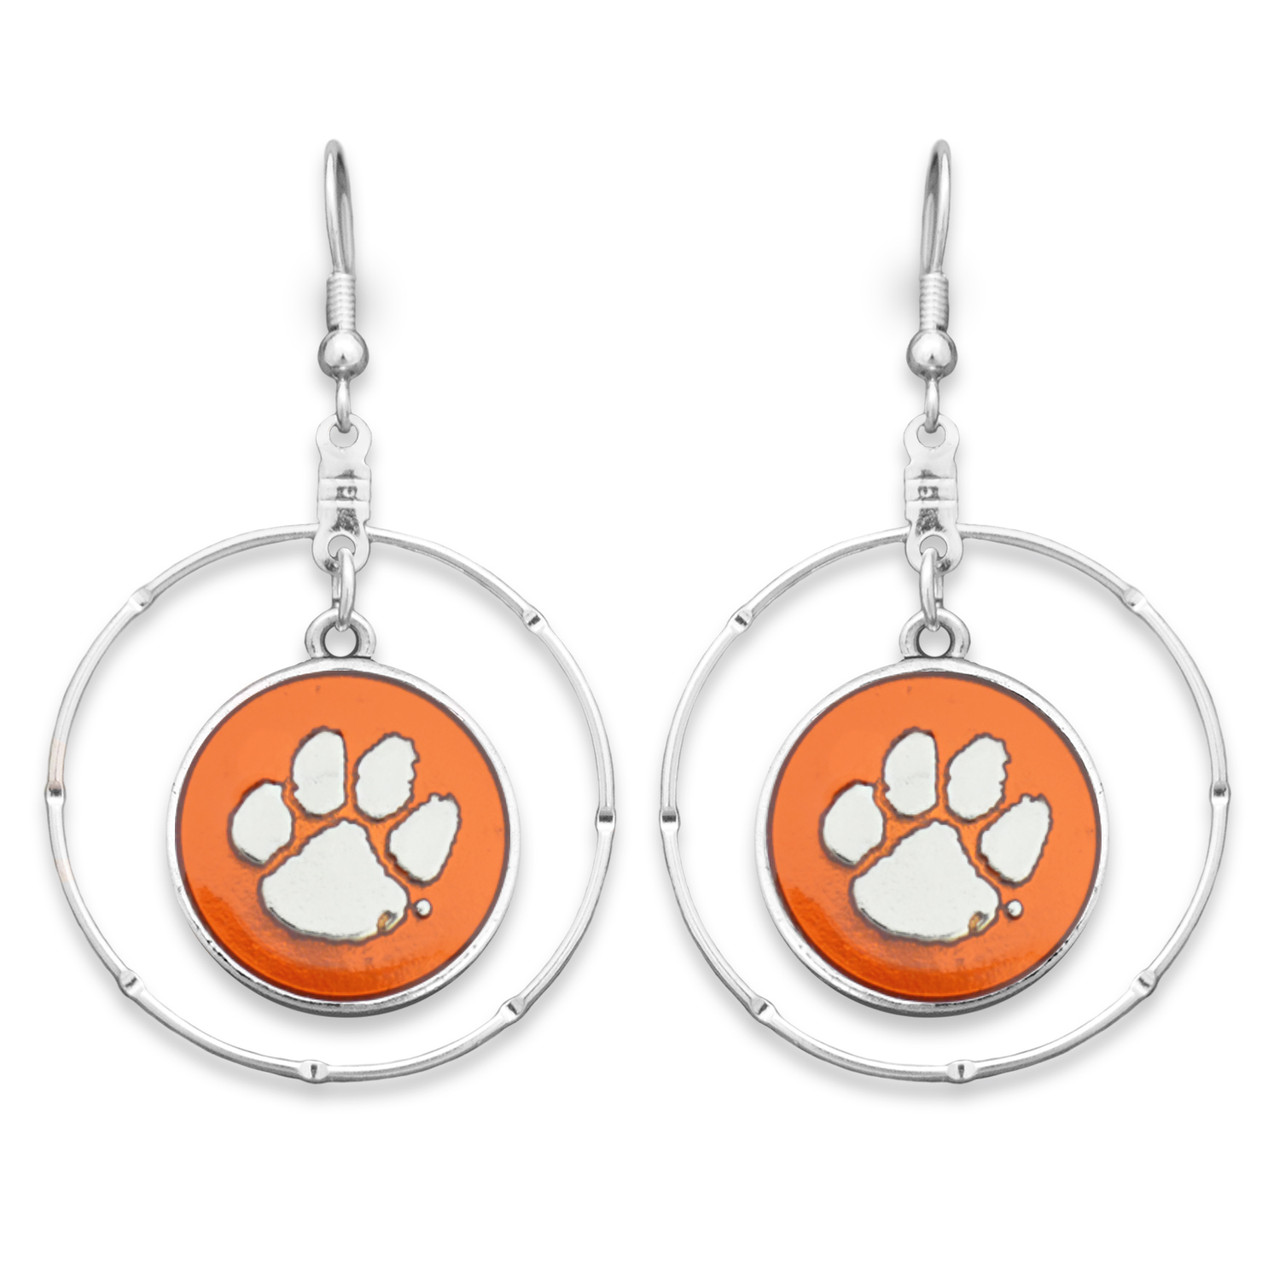 Clemson Tigers Earrings- Campus Chic-CL56160